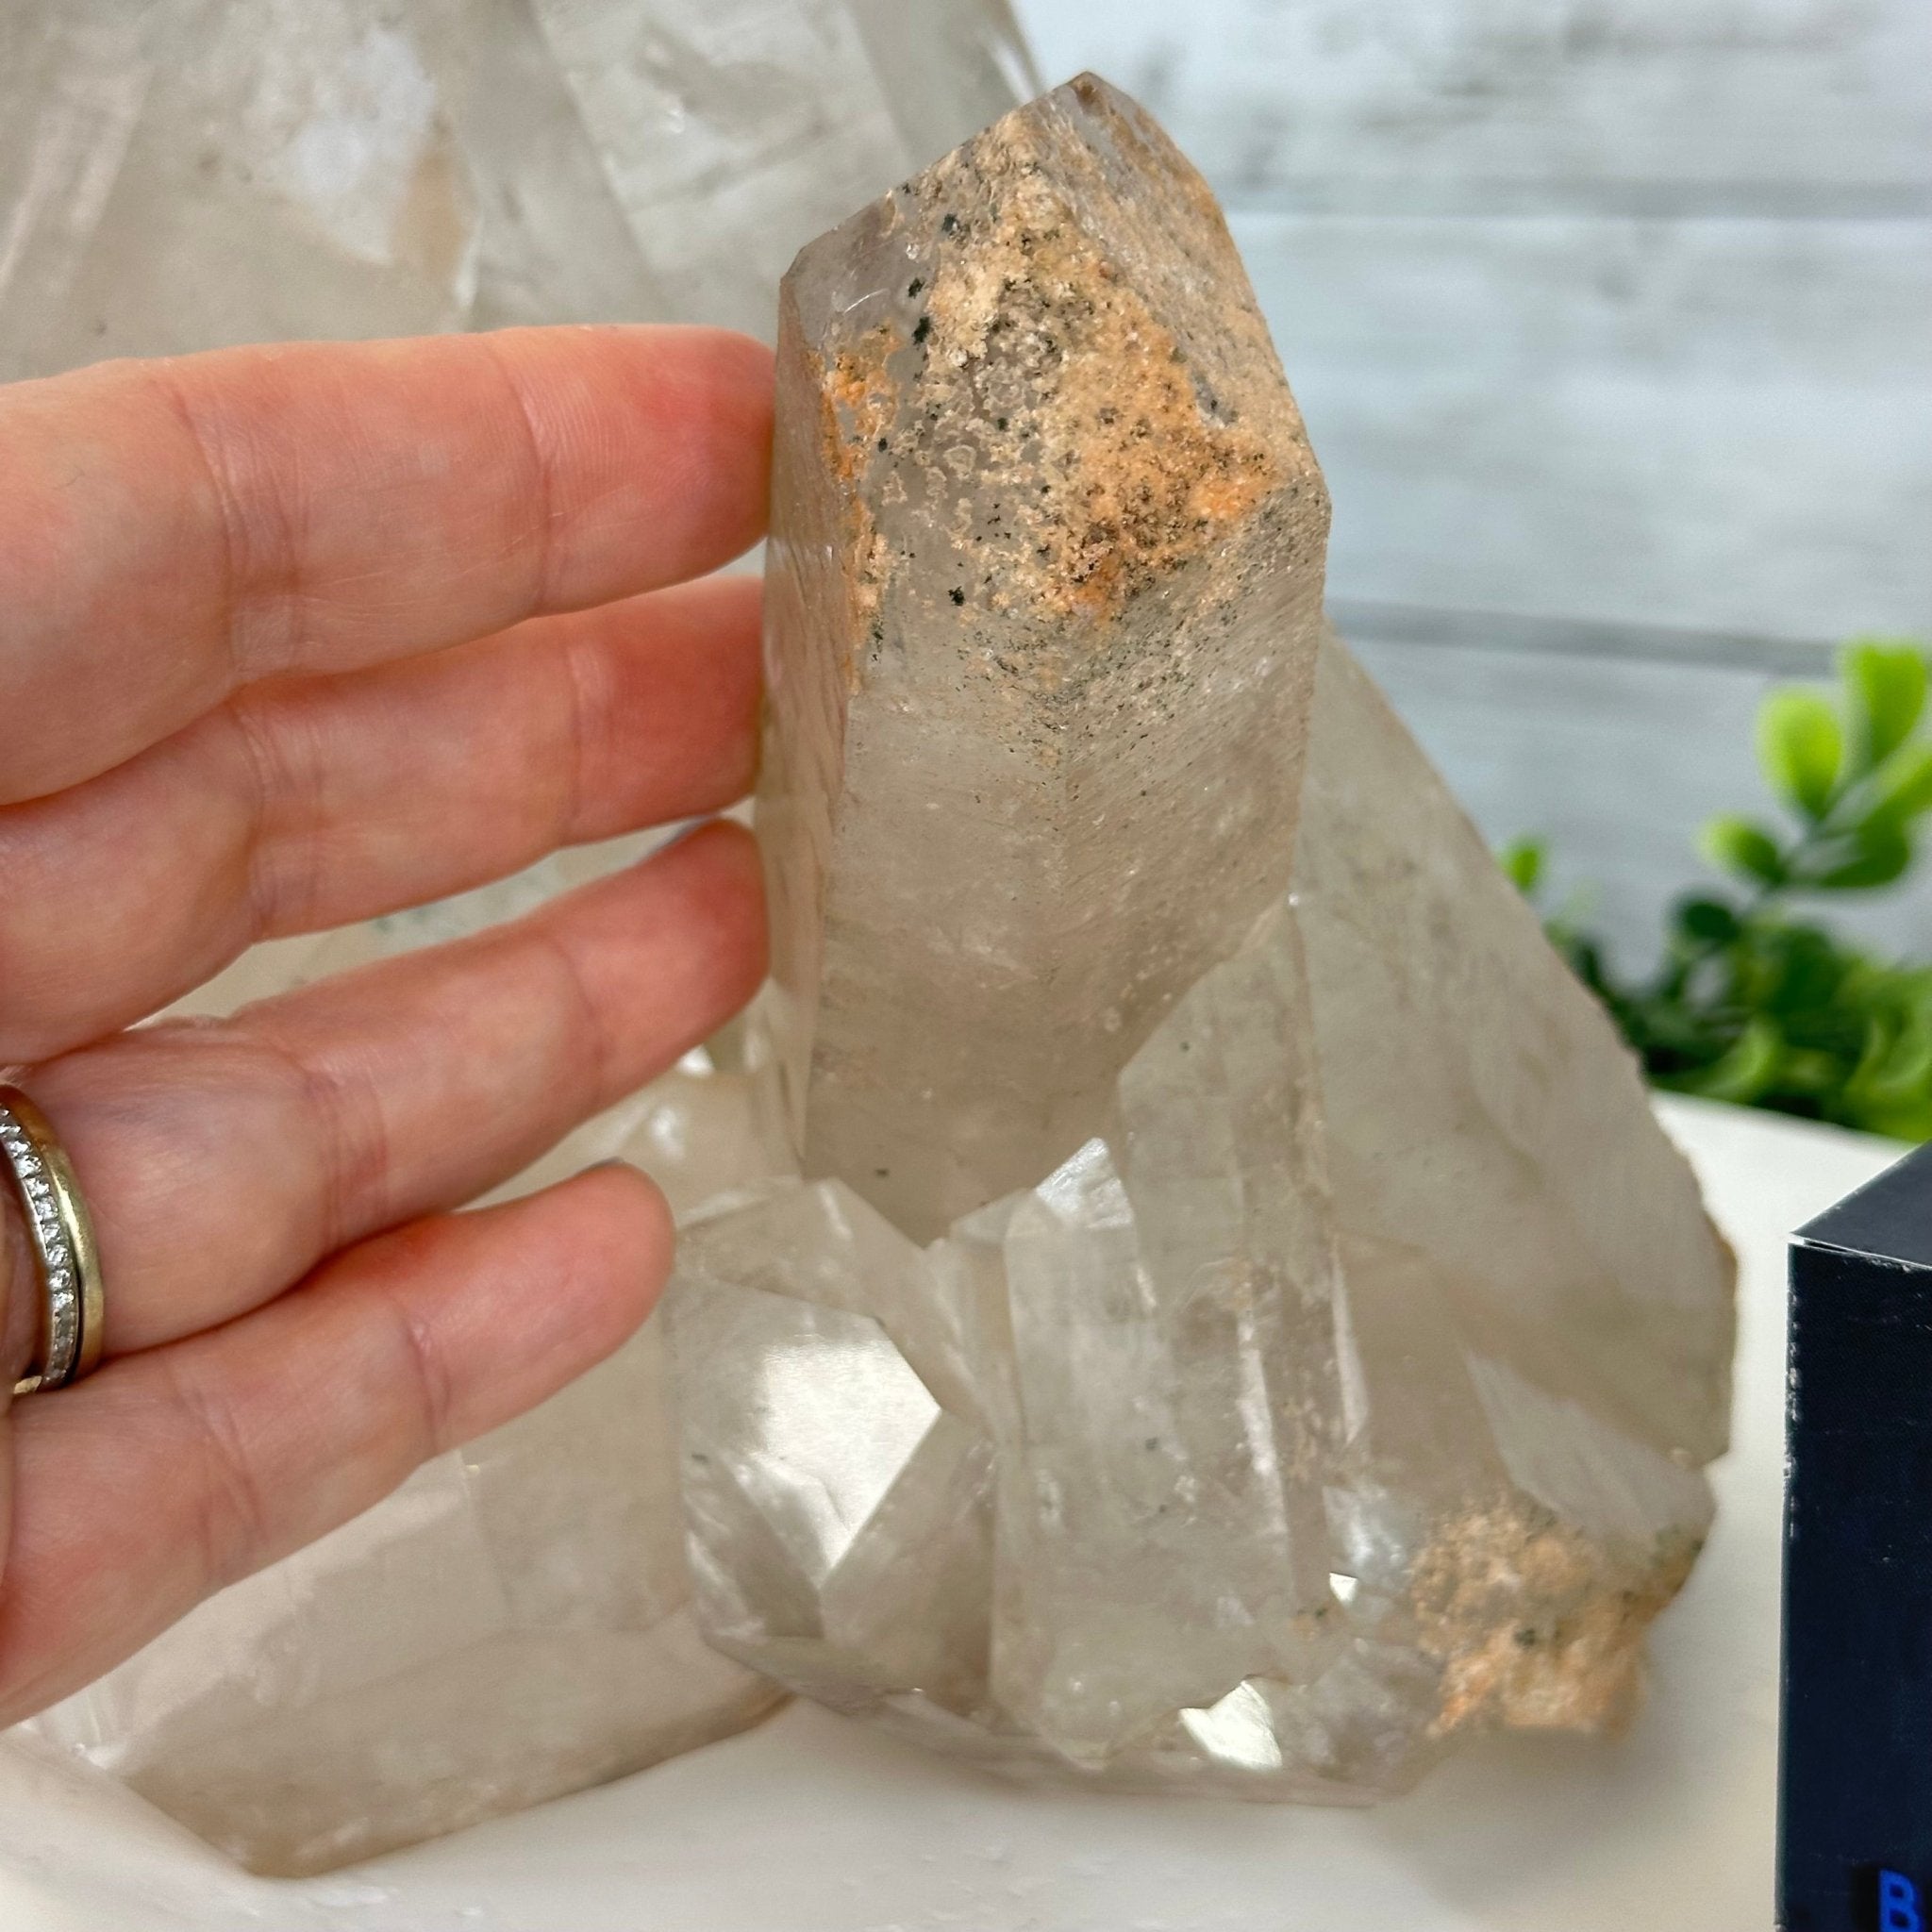 Brazilian Clear Quartz Crystal Cluster 7.4 lbs & 8" Tall #5494-0009 by Brazil Gems® - Brazil GemsBrazil GemsBrazilian Clear Quartz Crystal Cluster 7.4 lbs & 8" Tall #5494-0009 by Brazil Gems®Clusters With Natural Bases5494-0009